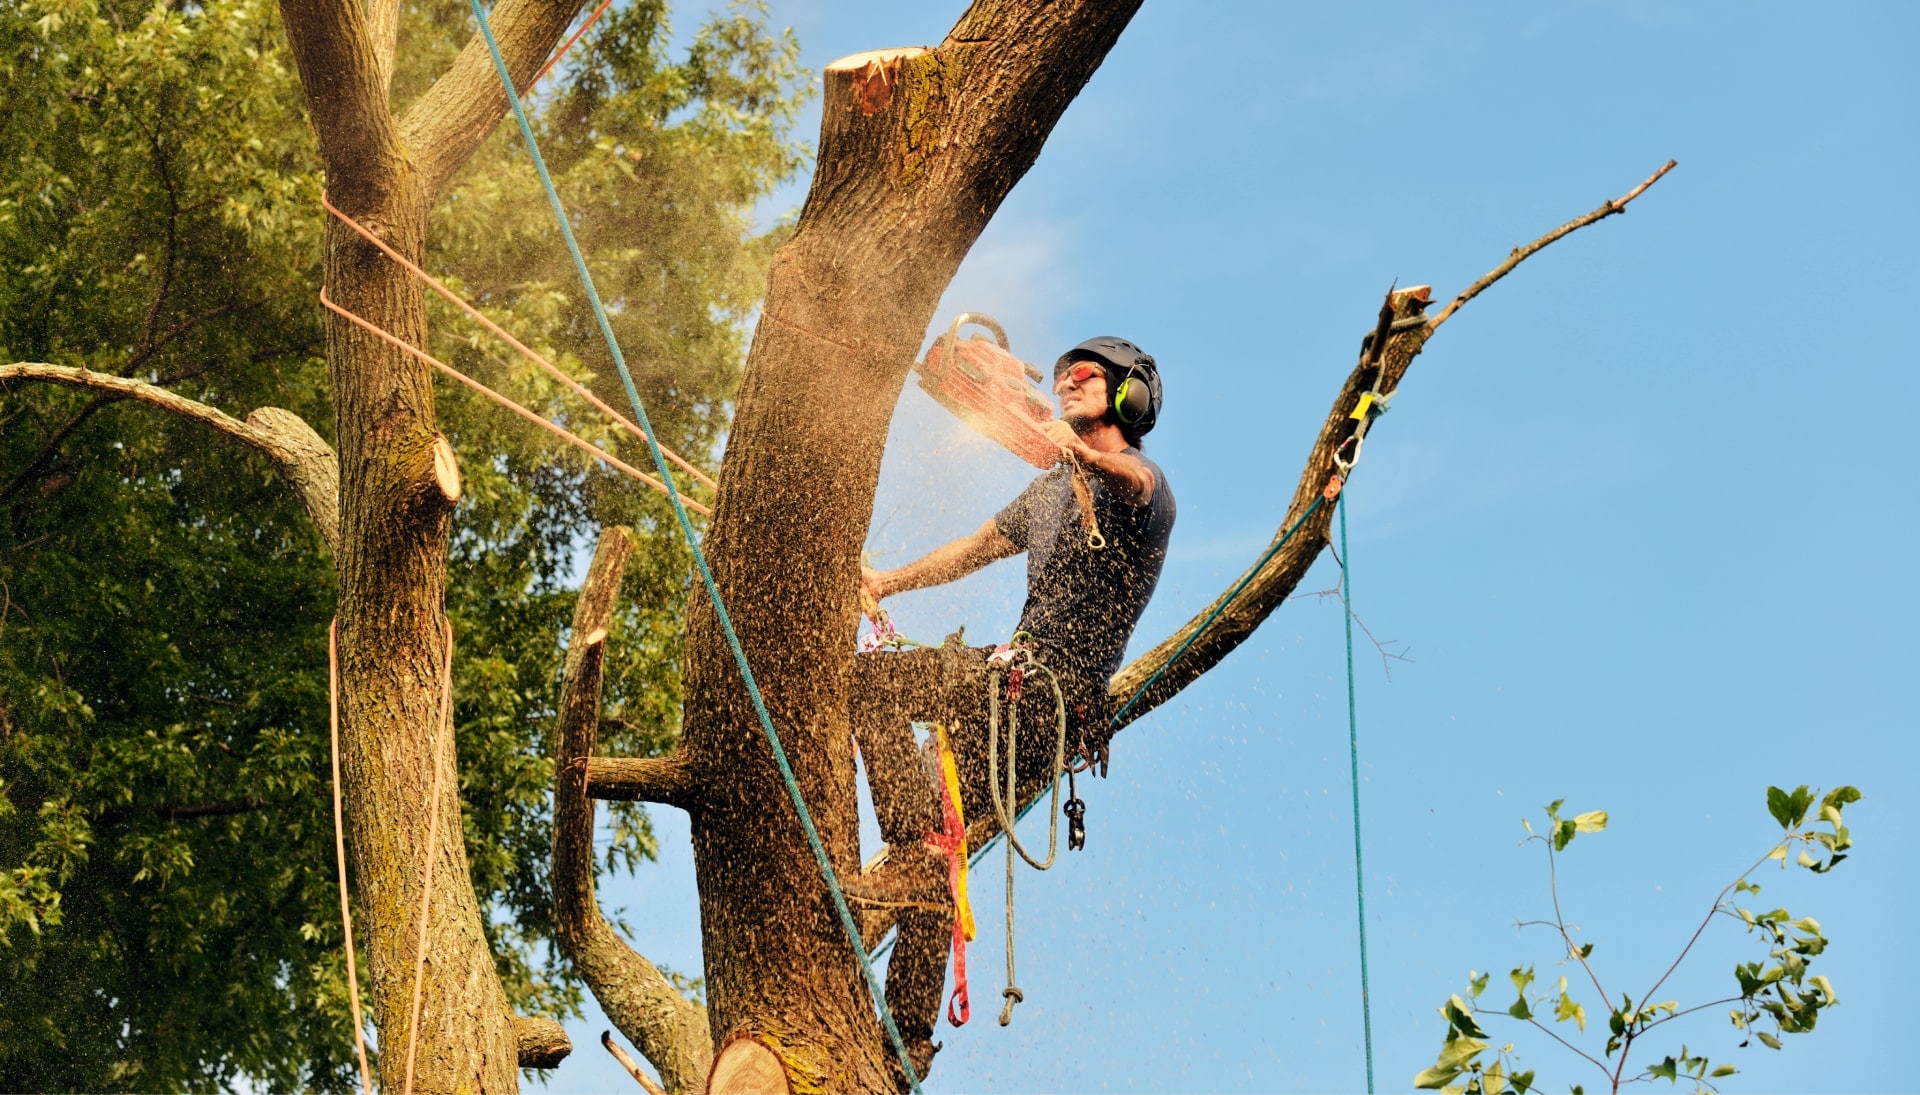 Pocatello tree removal experts solve tree issues.